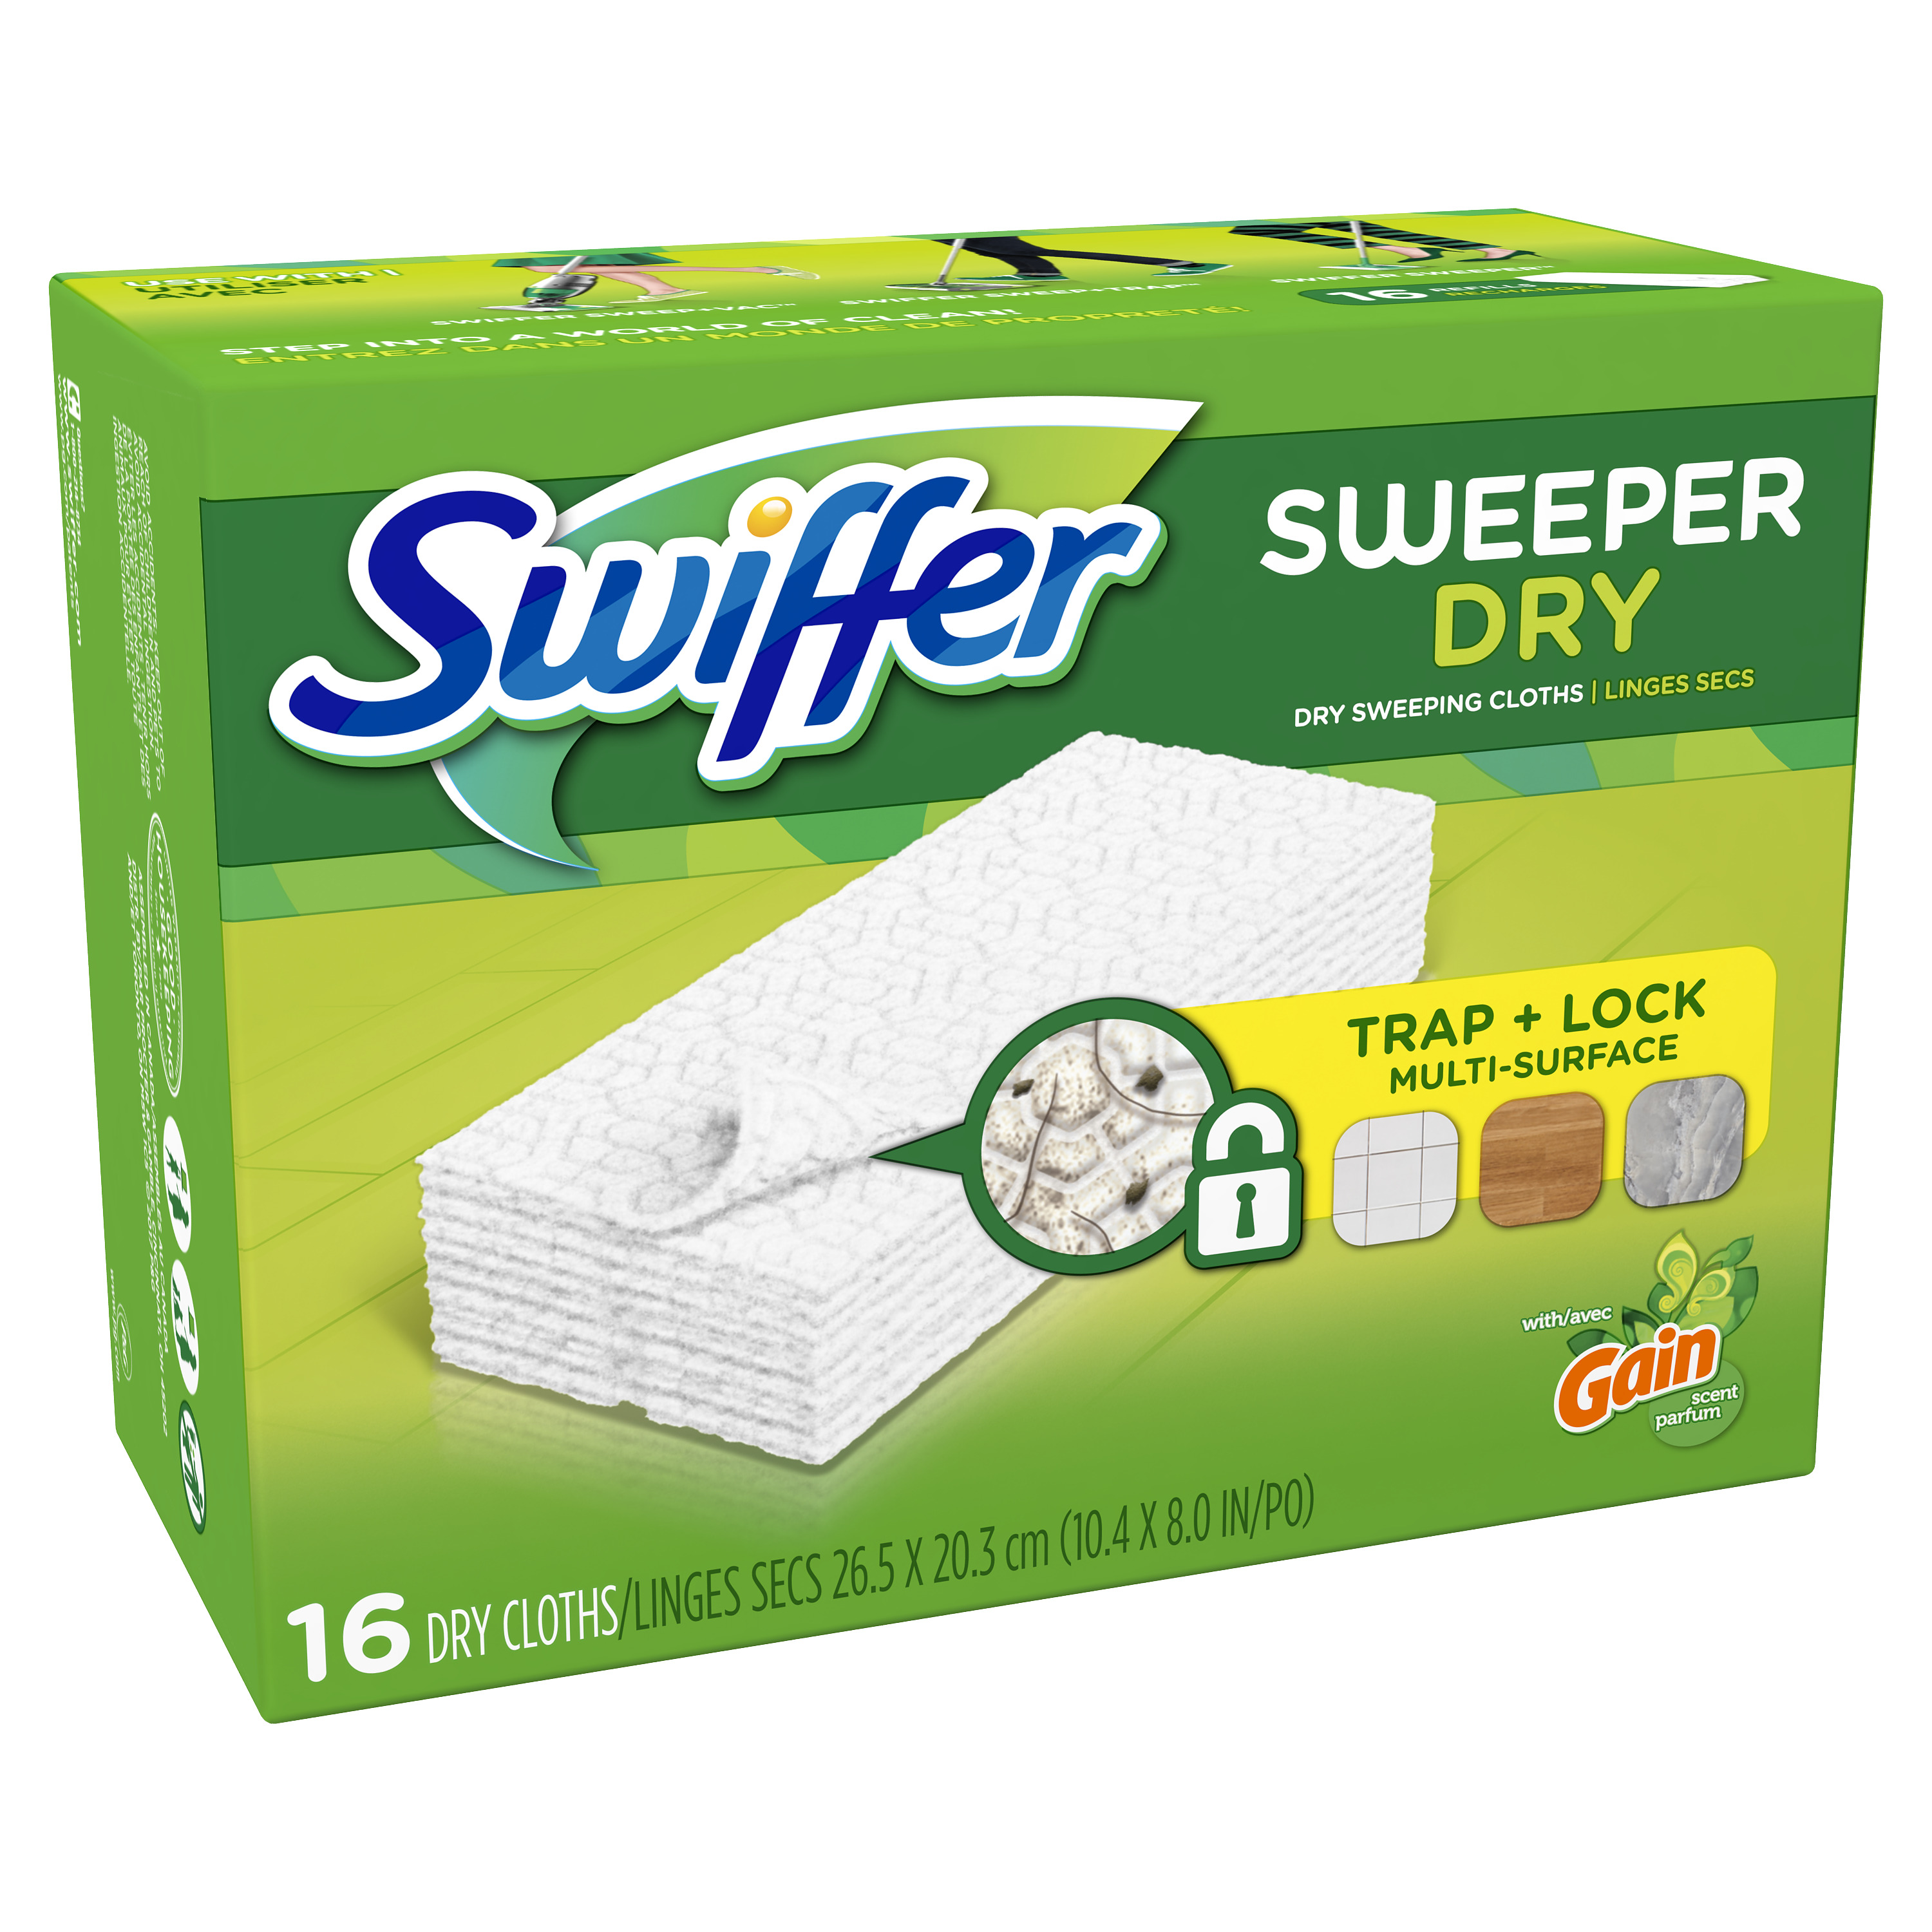 Swiffer Sweeper Dry Sweeping Pad Multi Surface Refills for Dusters Floor Mop, Gain Scent, 16 count - image 3 of 10